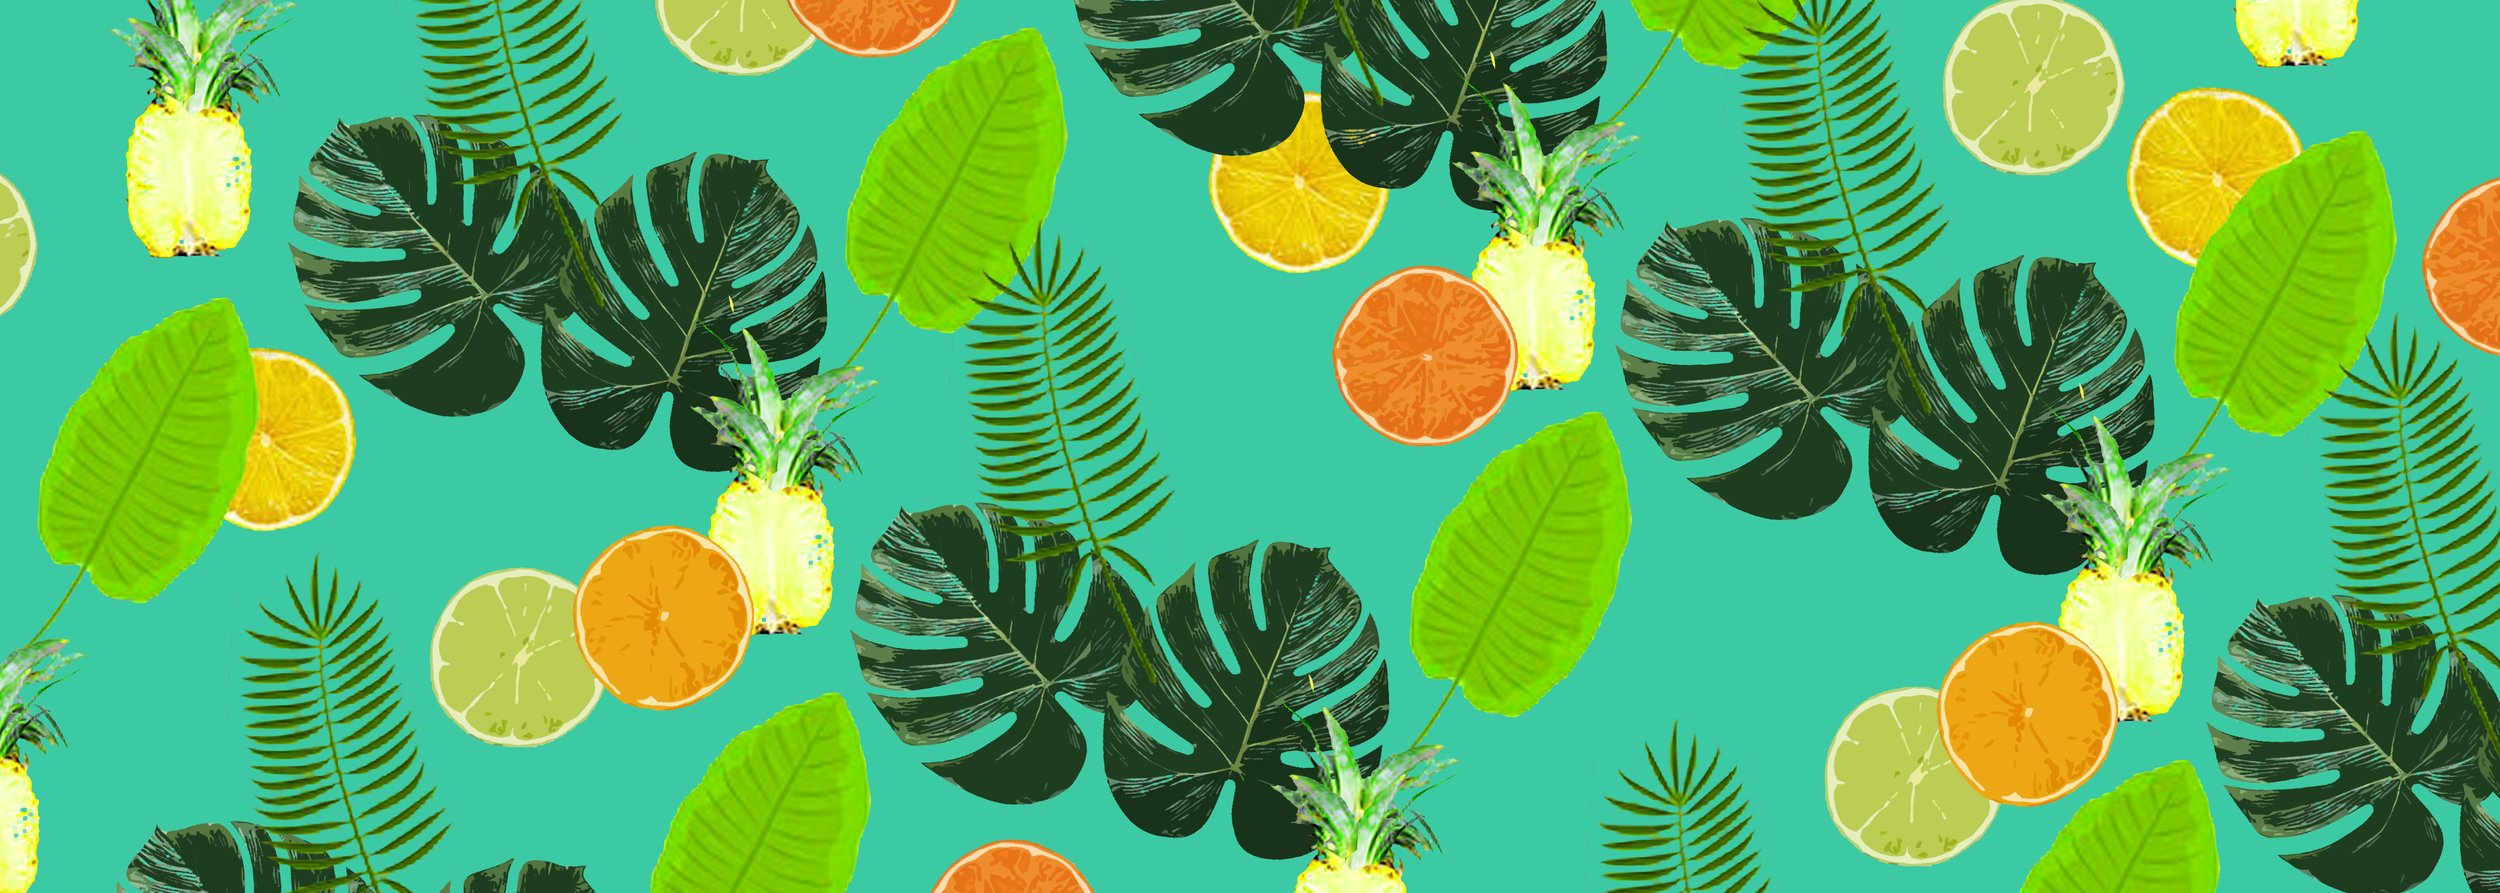   Tropical Textile  2018   study for mural    